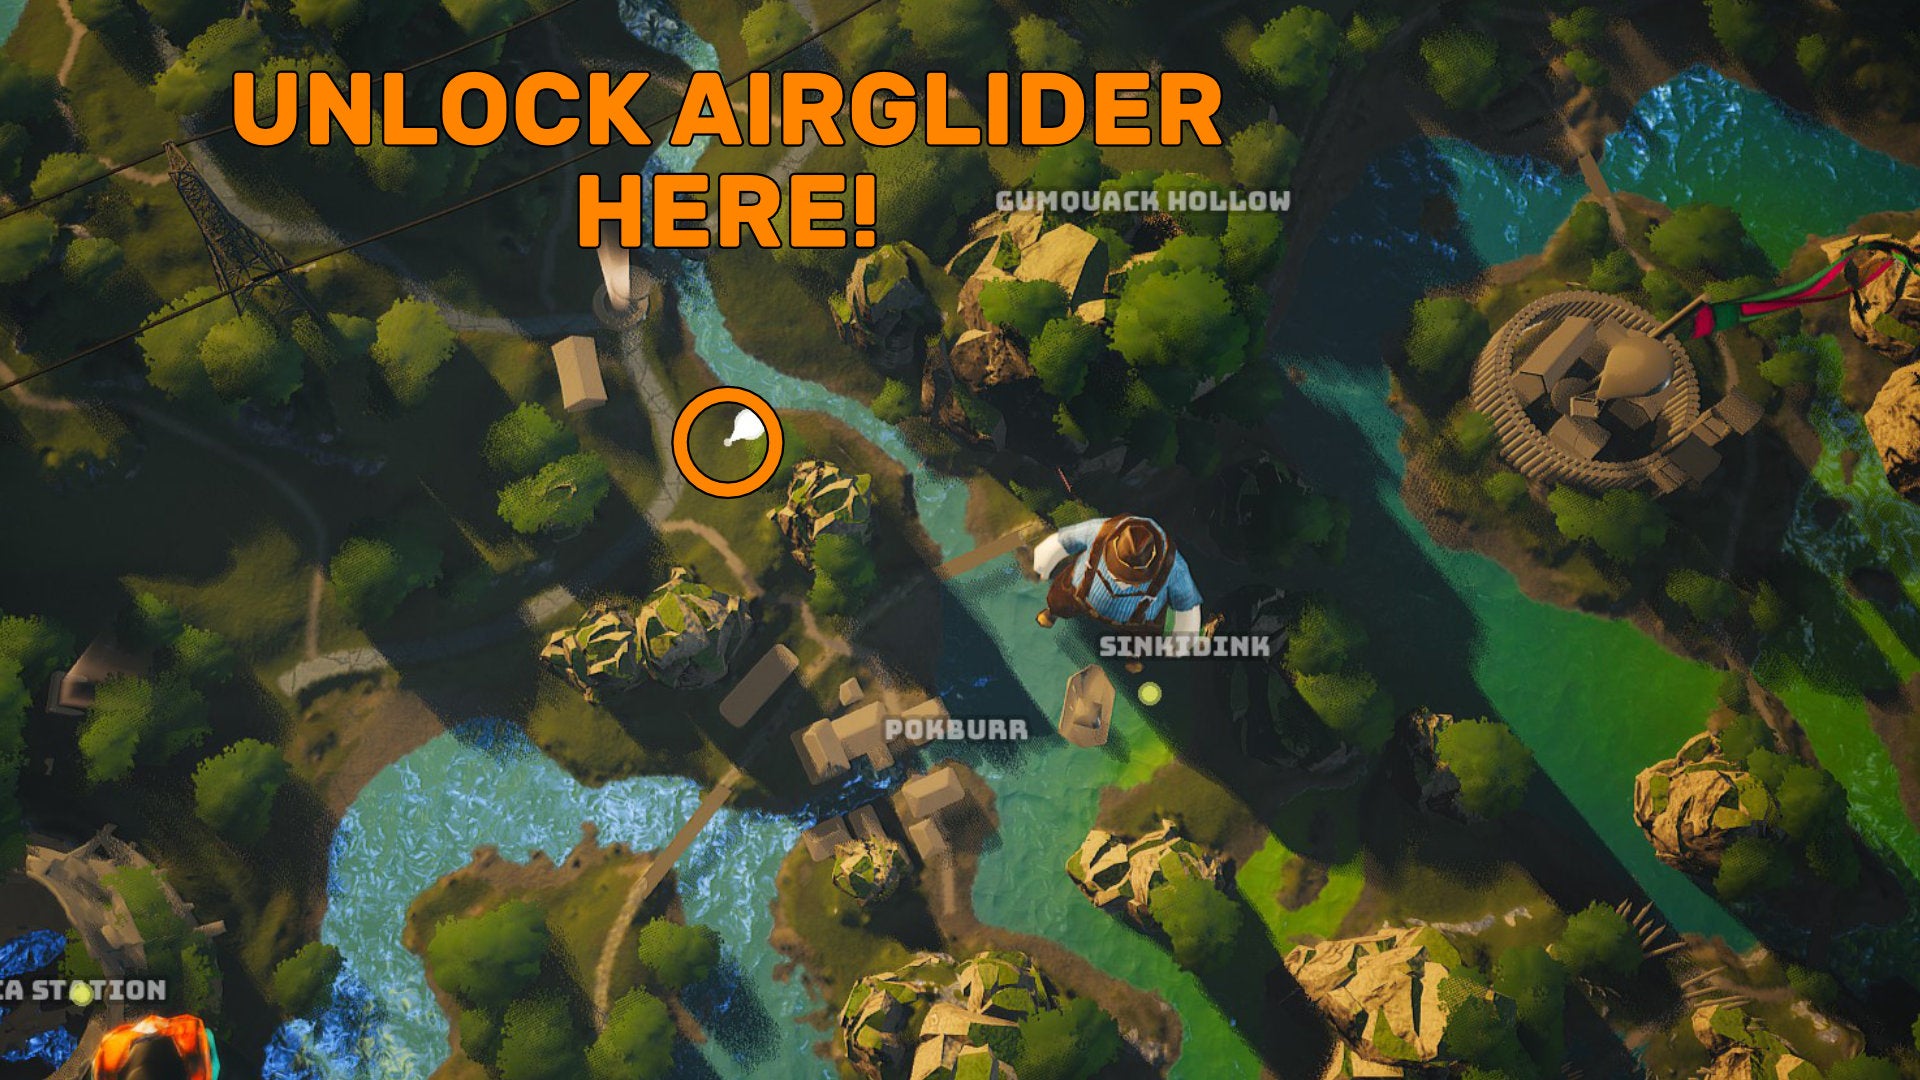 A screenshot of part of the Biomutant map, with a "mirage" side quest location highlighted where you can unlock the Airglider automaton upgrade.